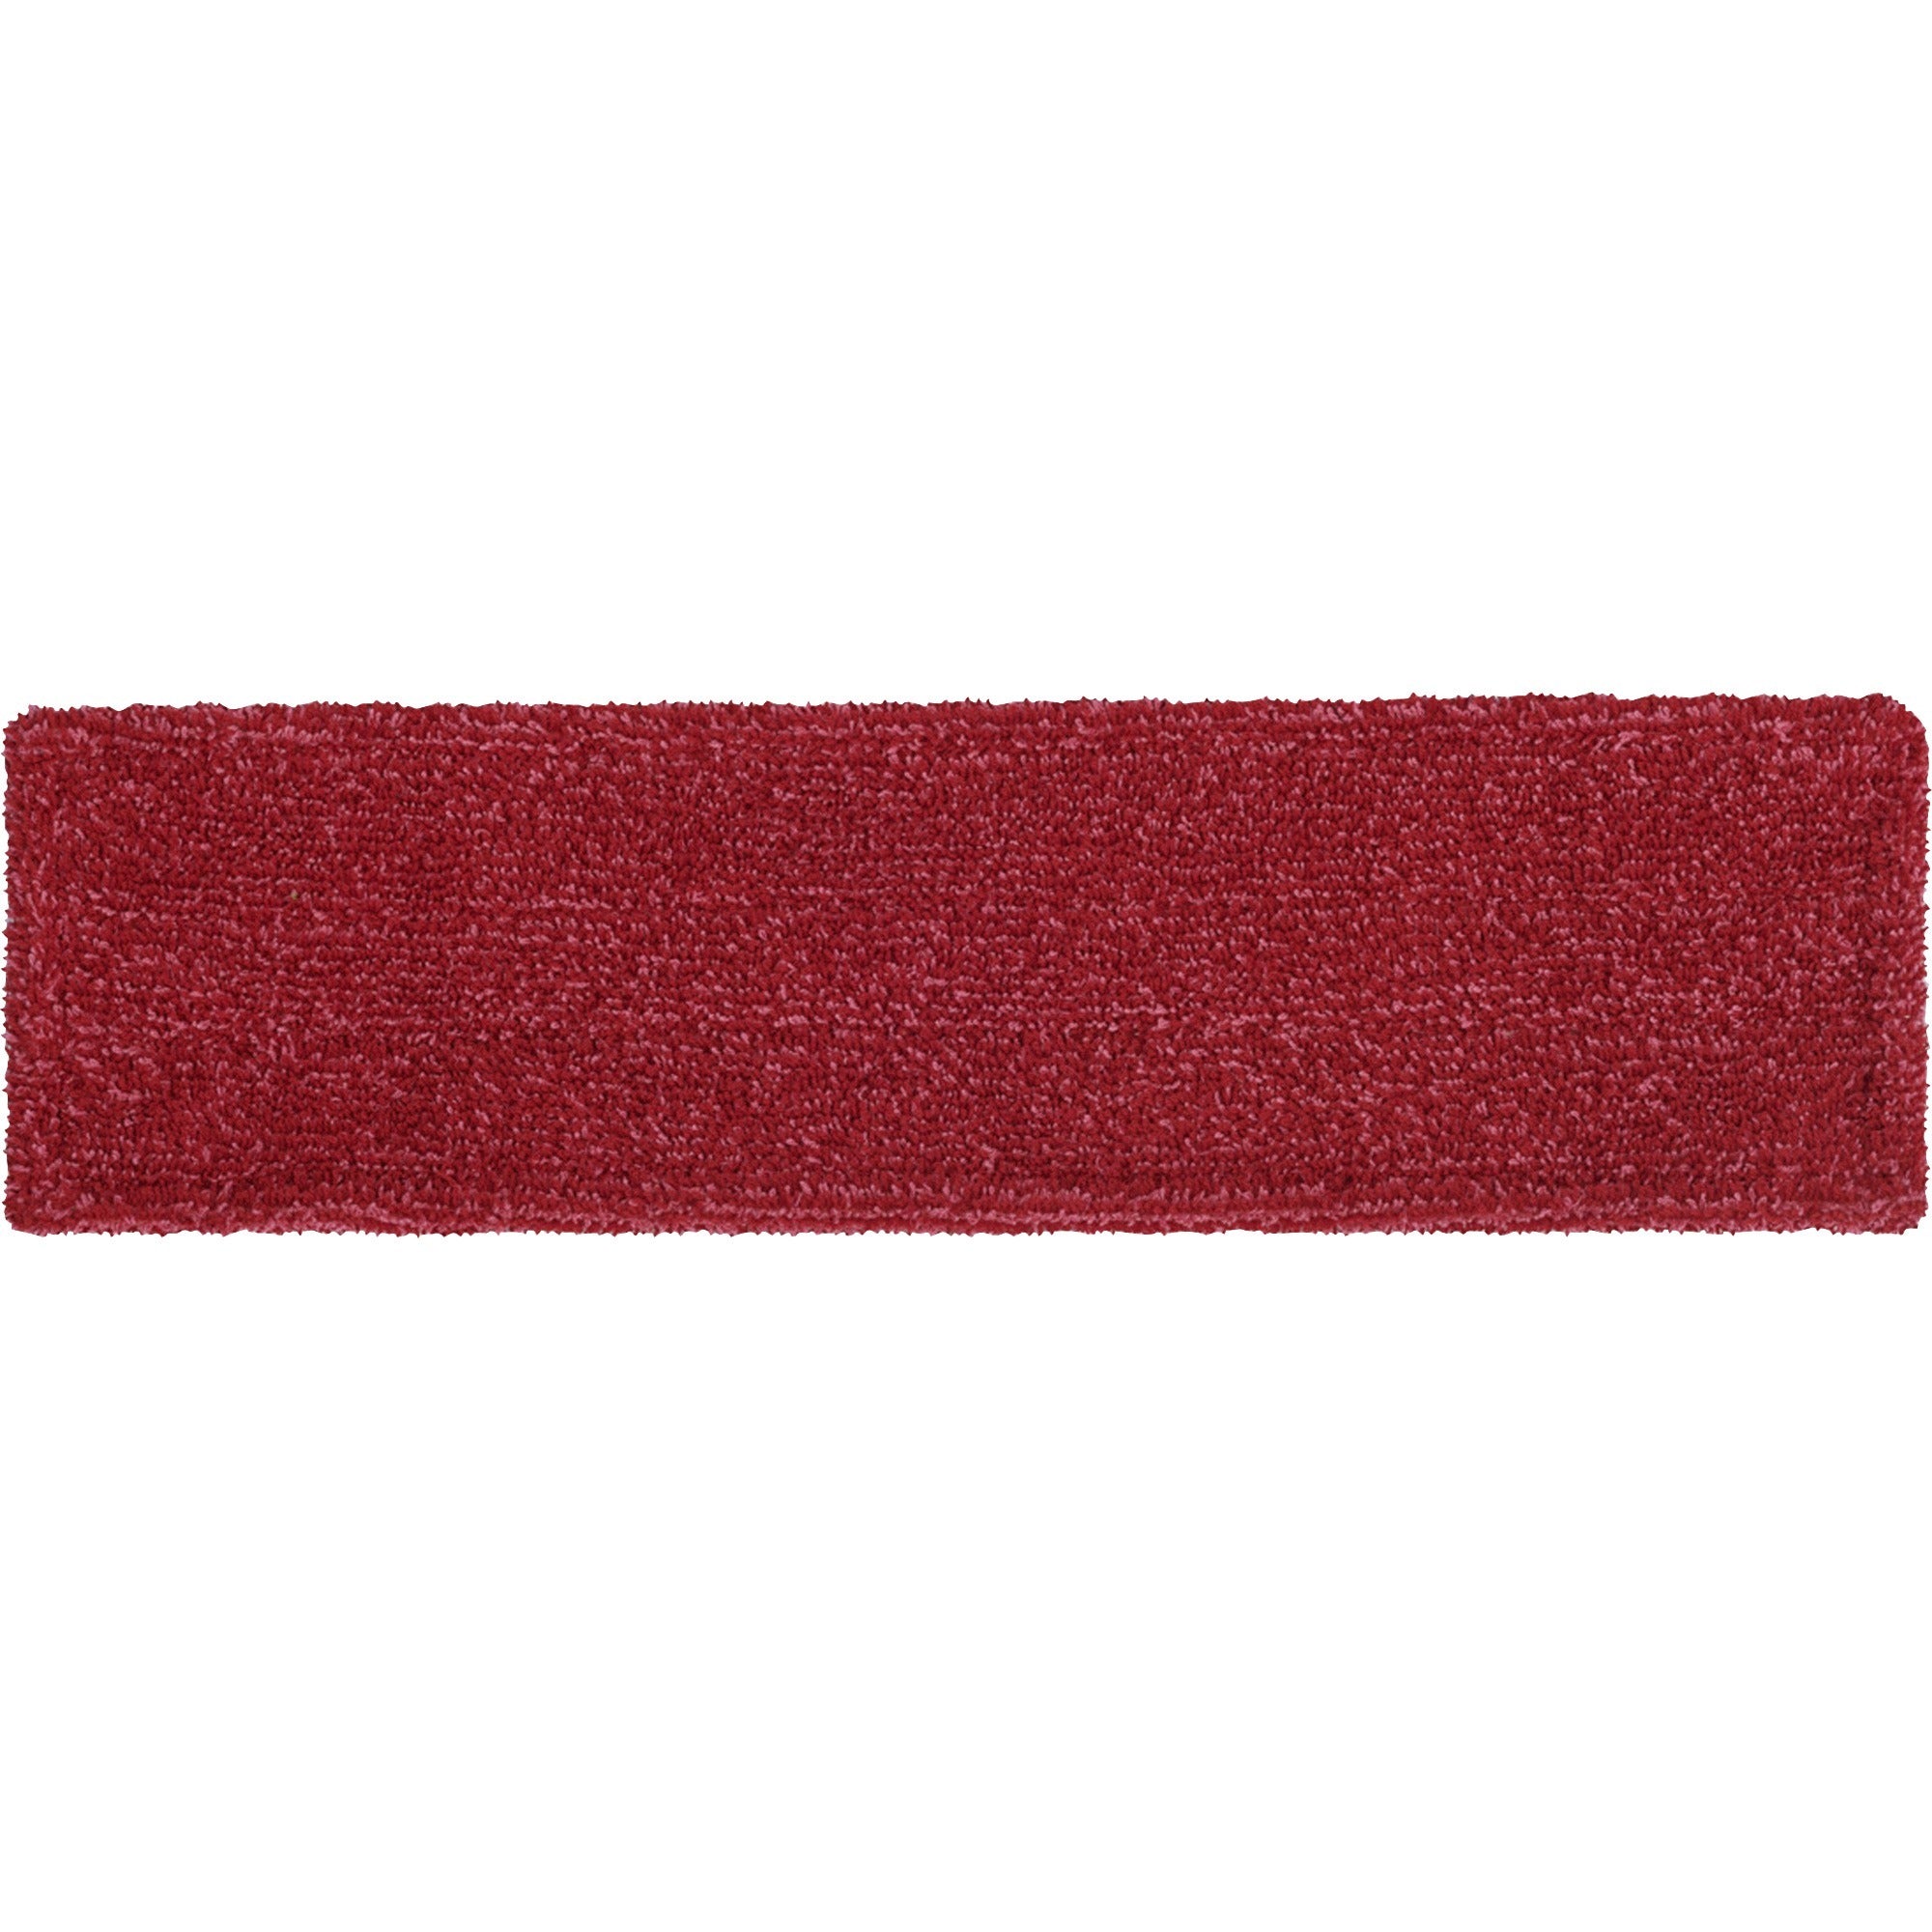 rubbermaid-commercial-adaptable-flat-mop-microfiber-pad-195-length-x-55-depth-microfiber-red-1each_rcp2132423 - 1